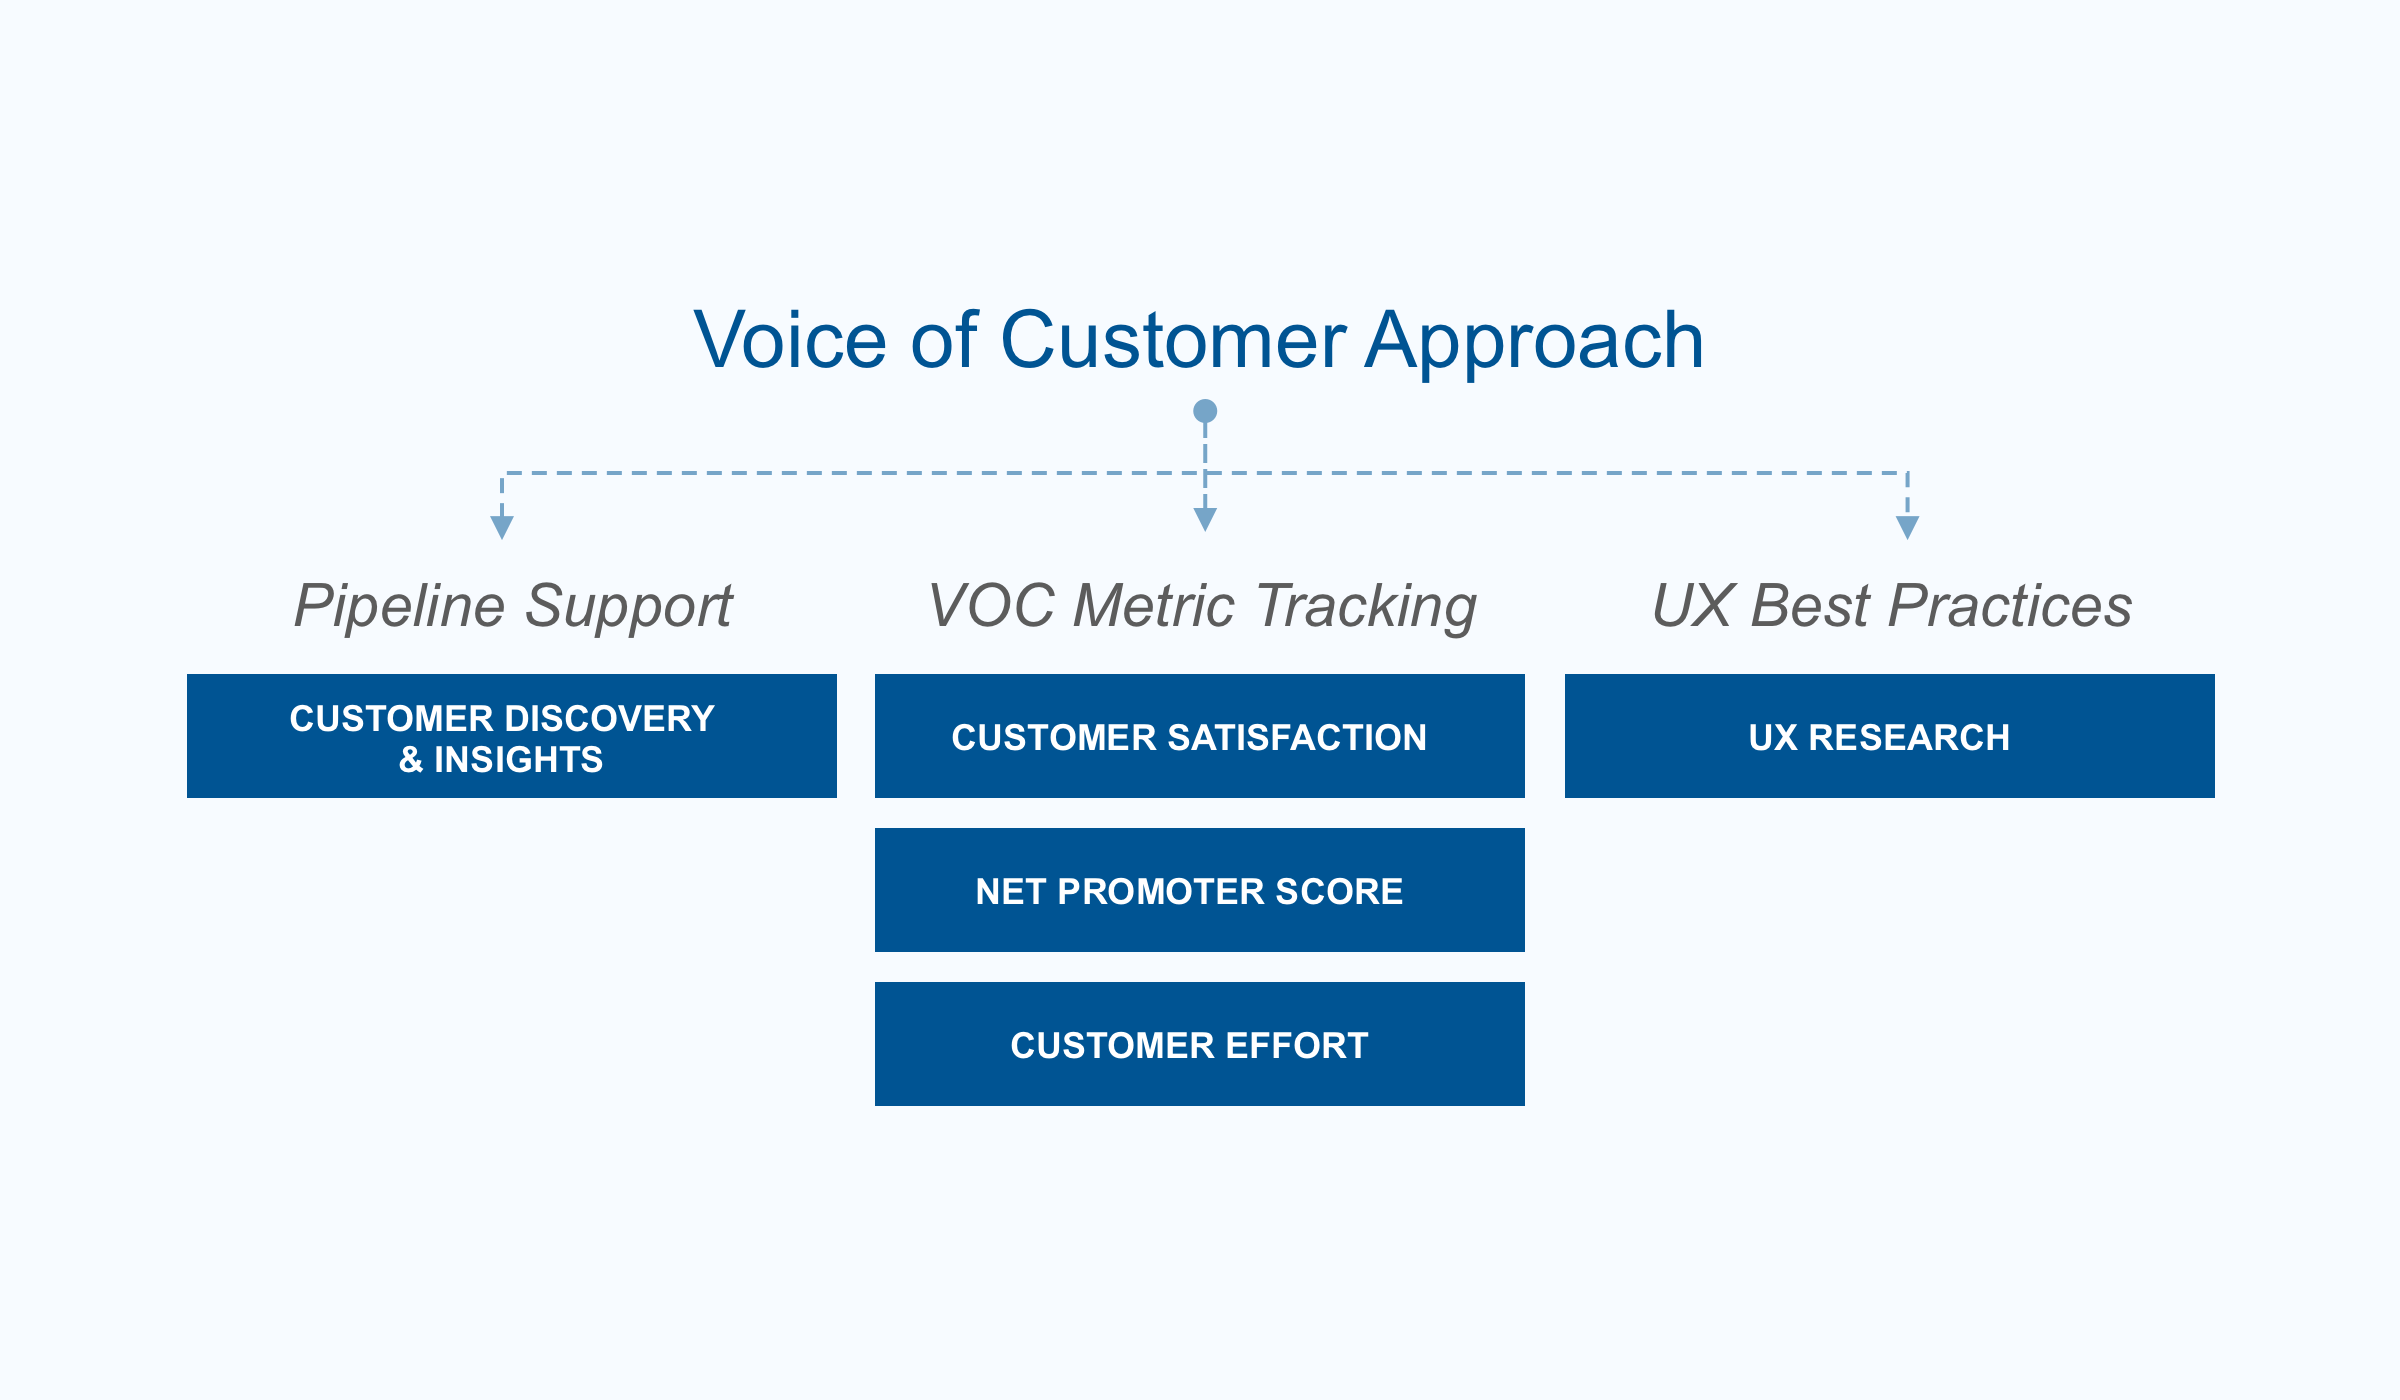 Voice of Customer Approach